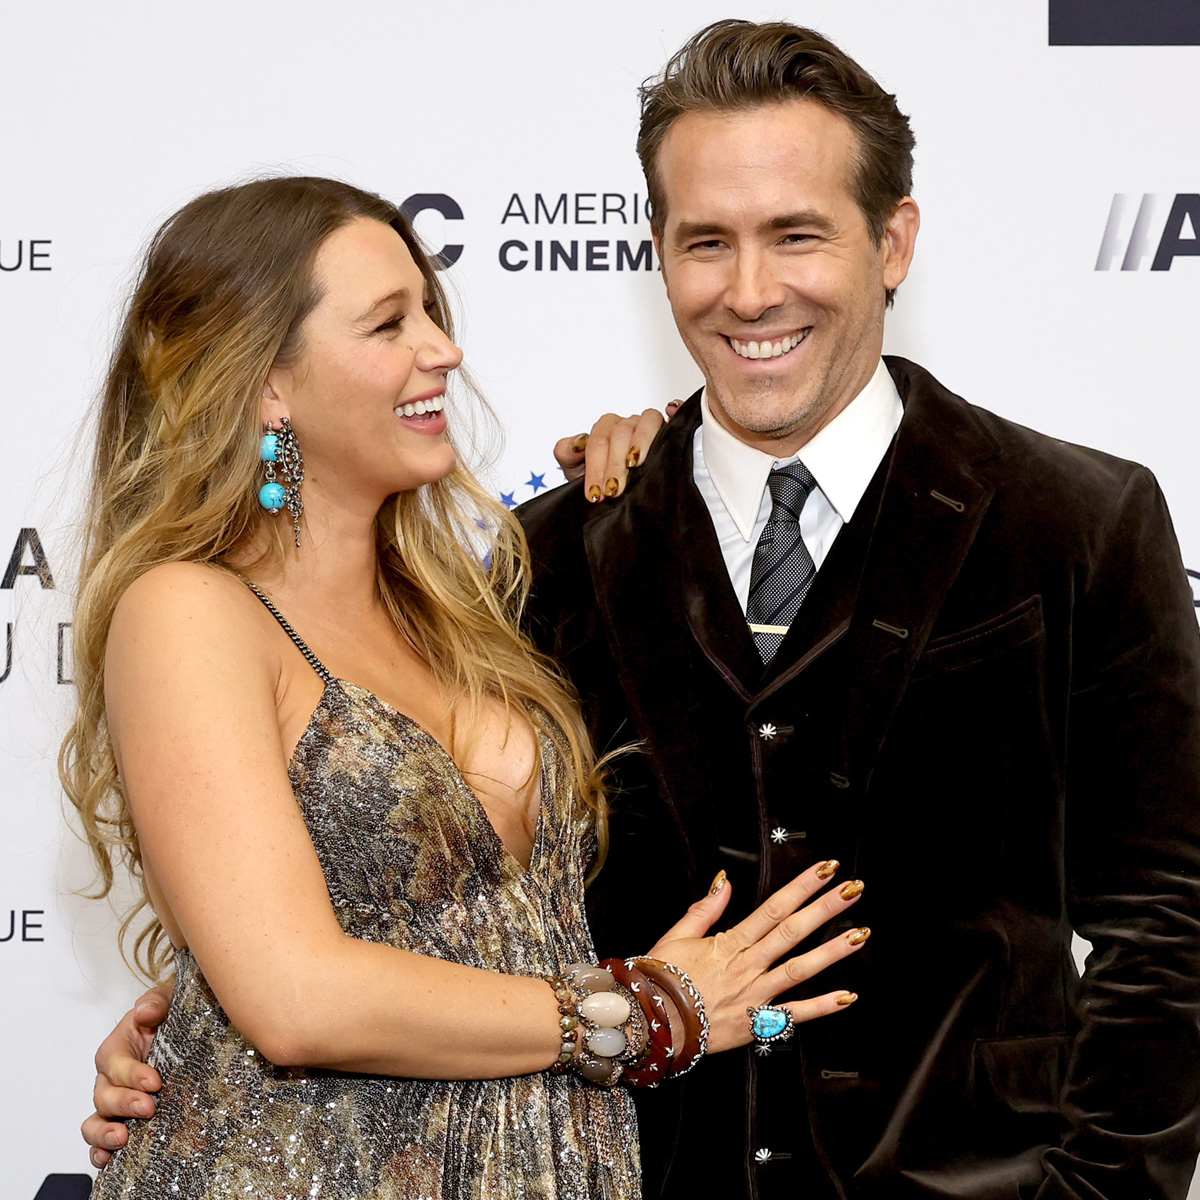 Ryan Reynolds says he is taking a little sabbatical from filmmaking